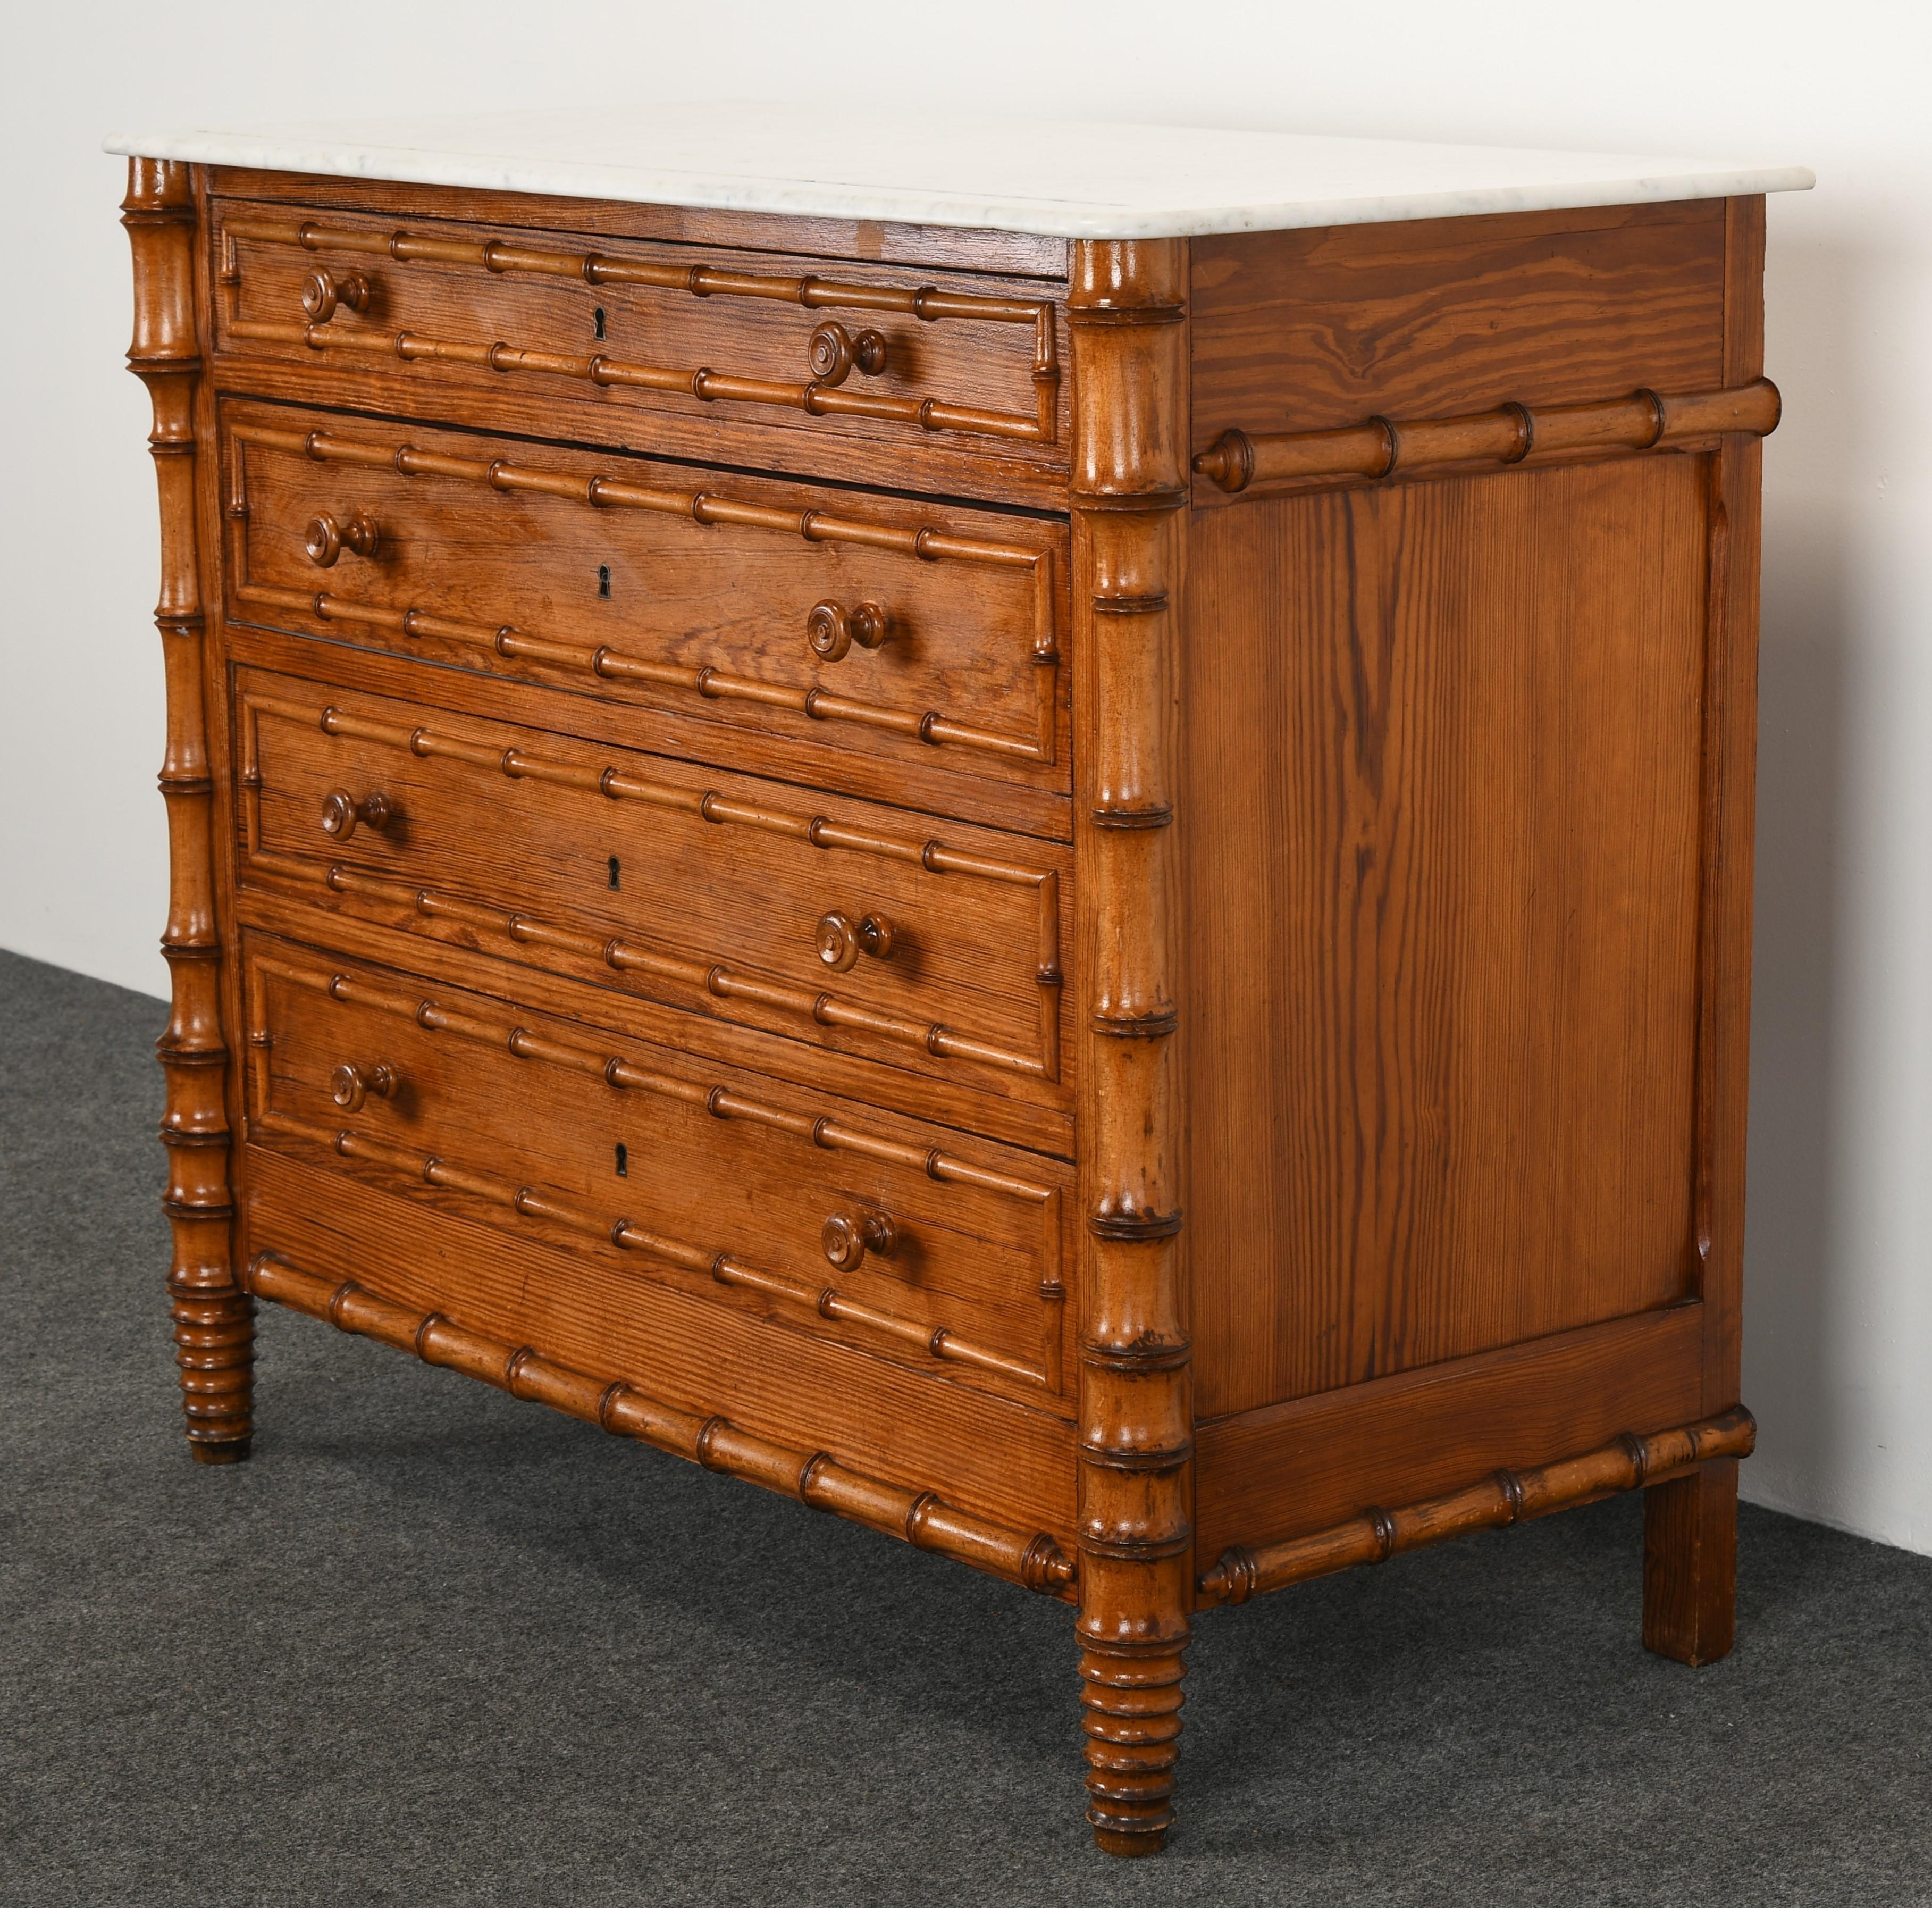 A beautiful faux bamboo pine dresser or chest of drawers with Carrera white marble top. This Victorian French or English commode could be used in any transitional or contemporary interior. The dresser has 4 drawers for ample storage. Perfect size